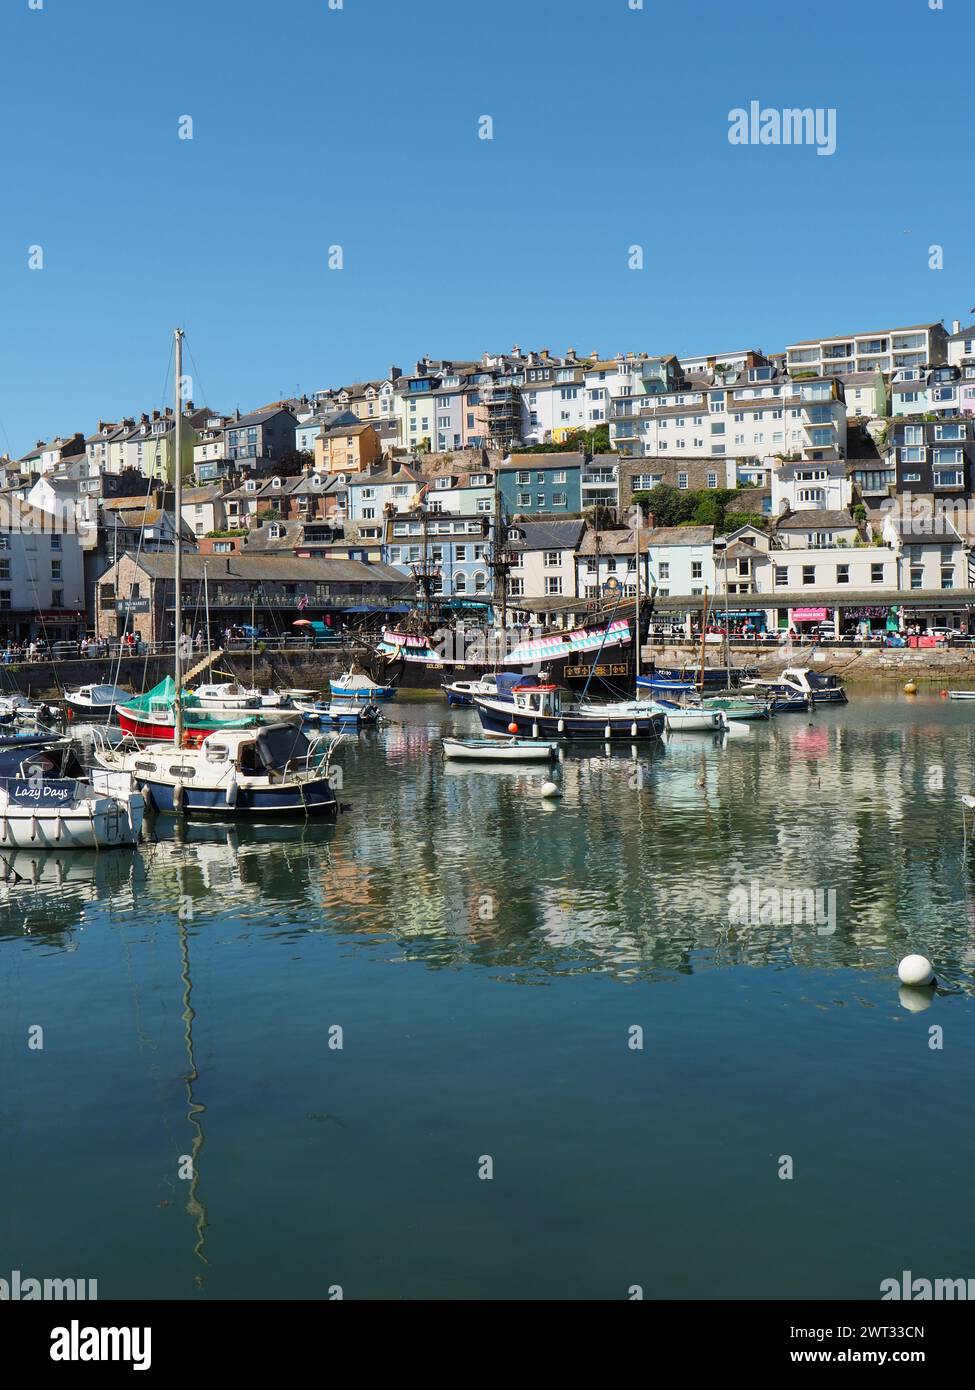 A replica of the Golden Hind sailing ship alongside the quayside in Brixham harbour, Torbay, South Devon, Southwest England. Stock Photo